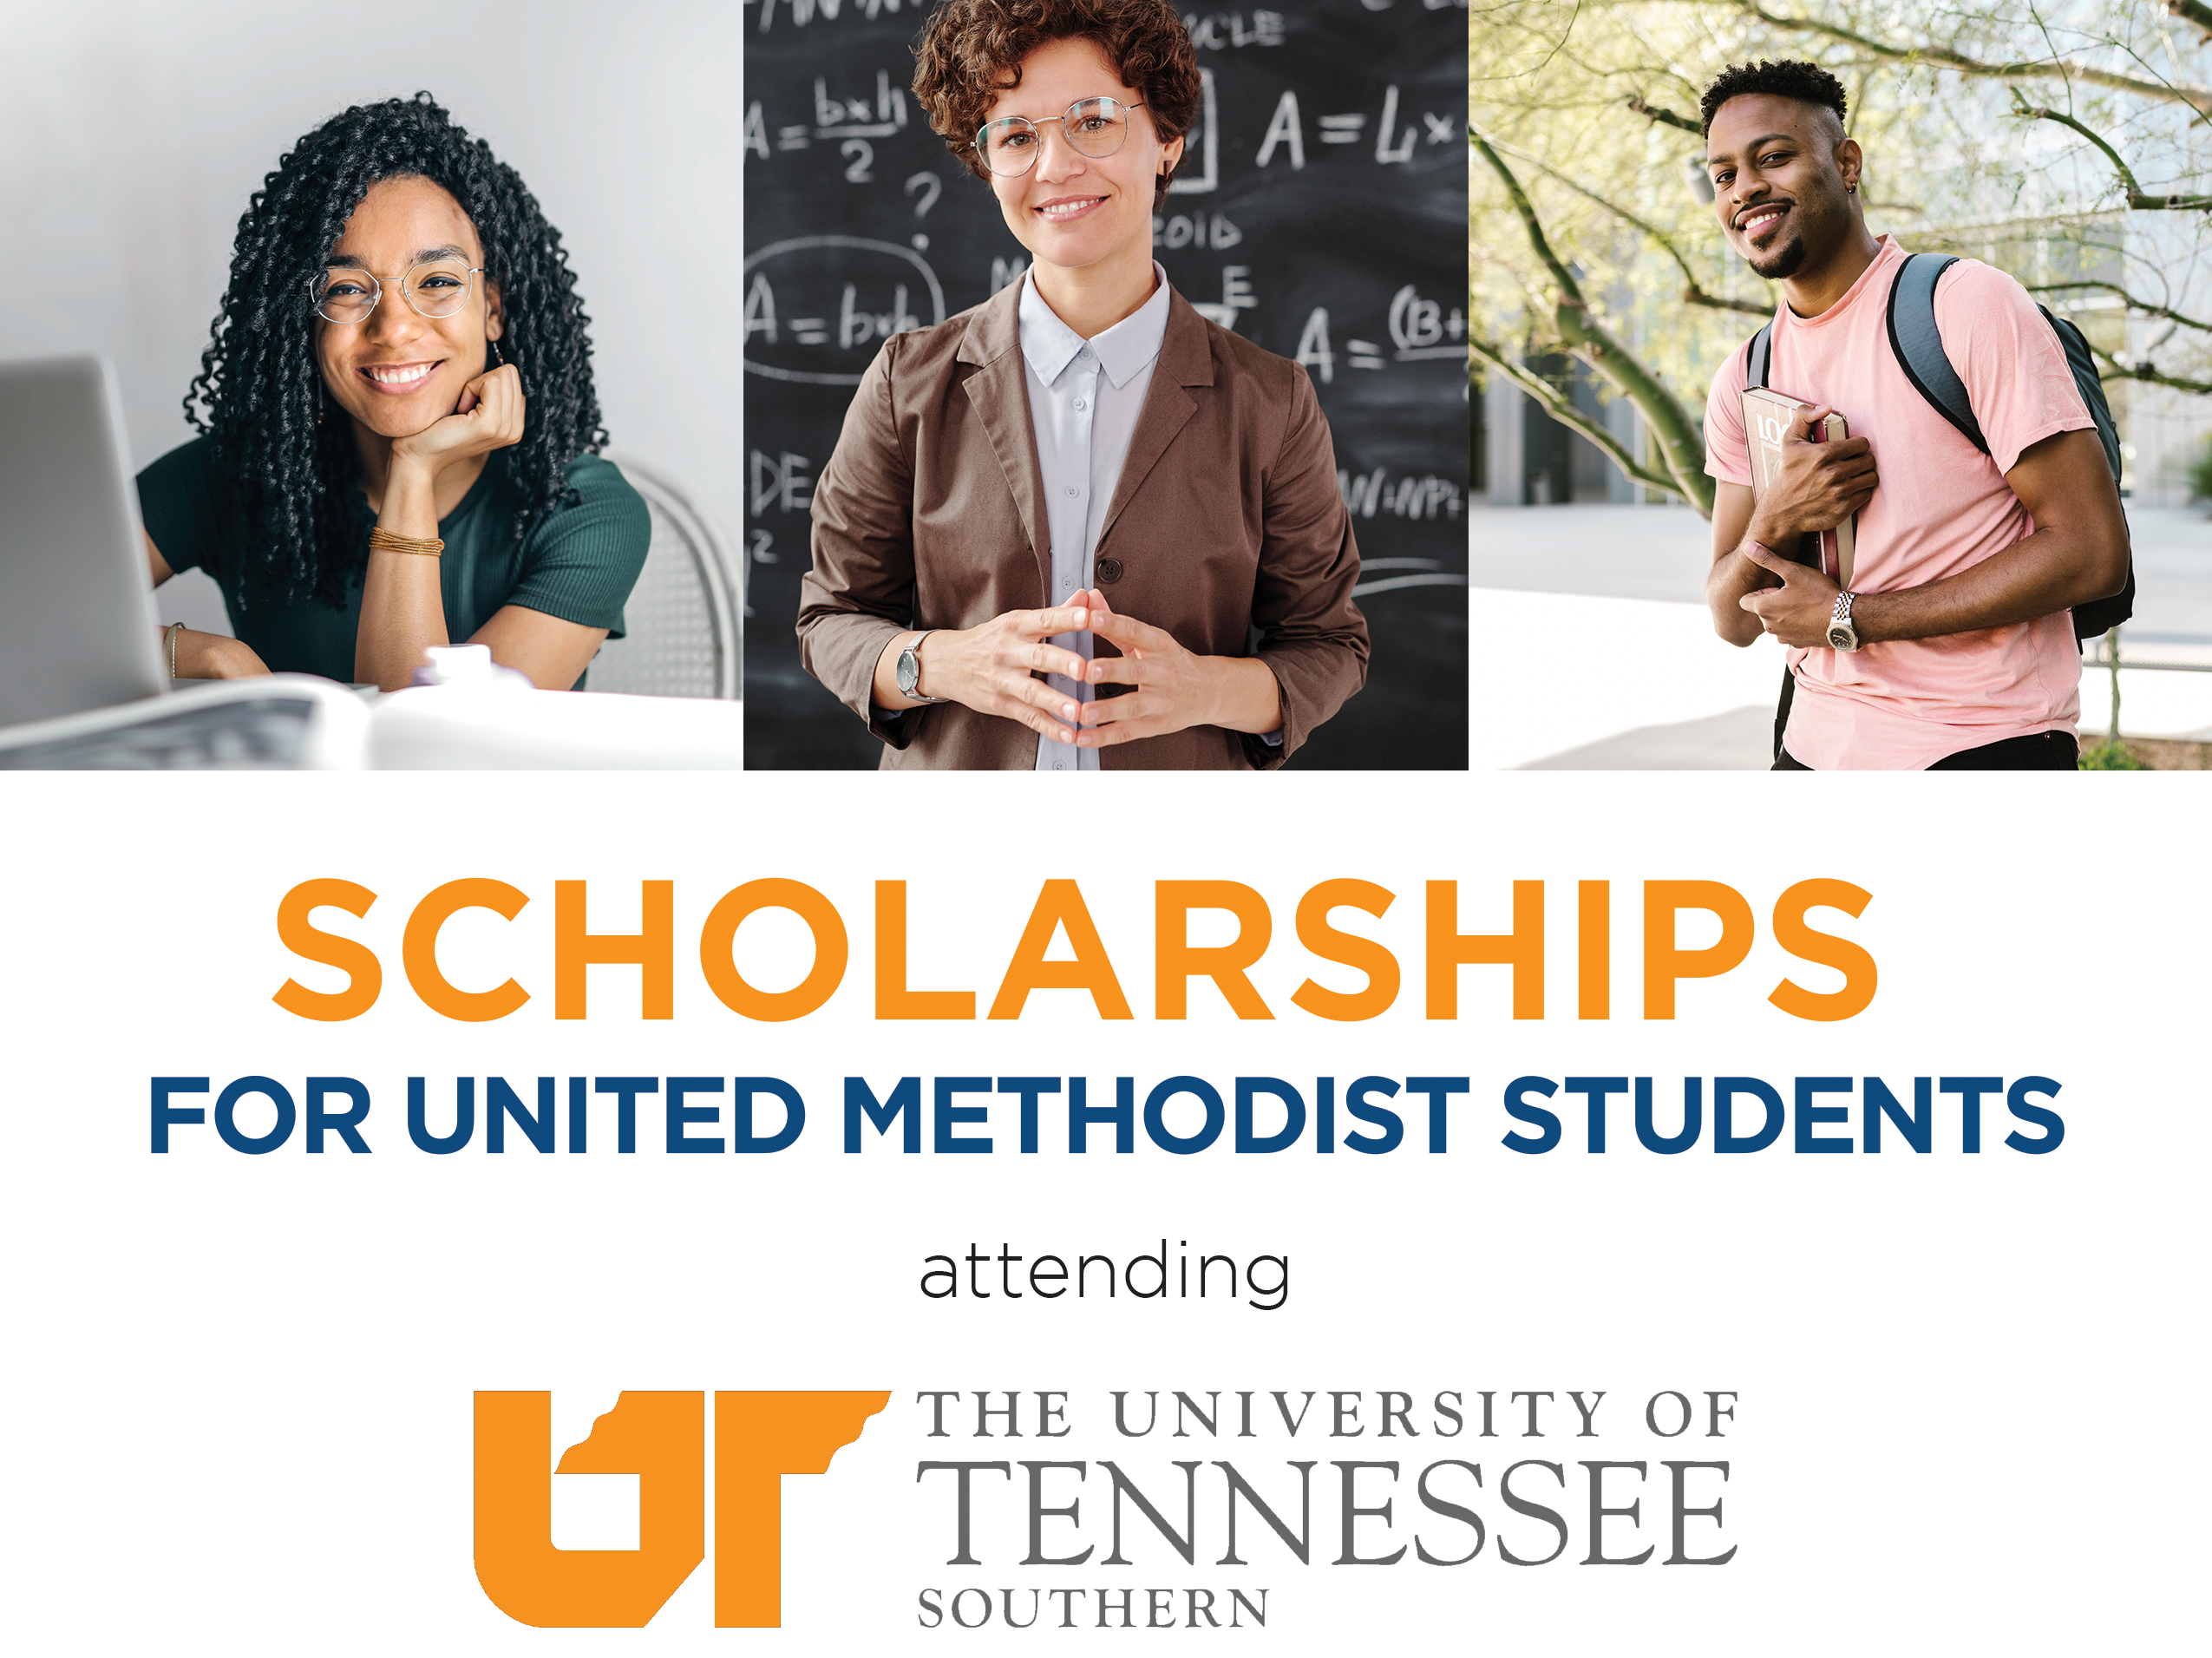 Scholarships for students attending UT Southern